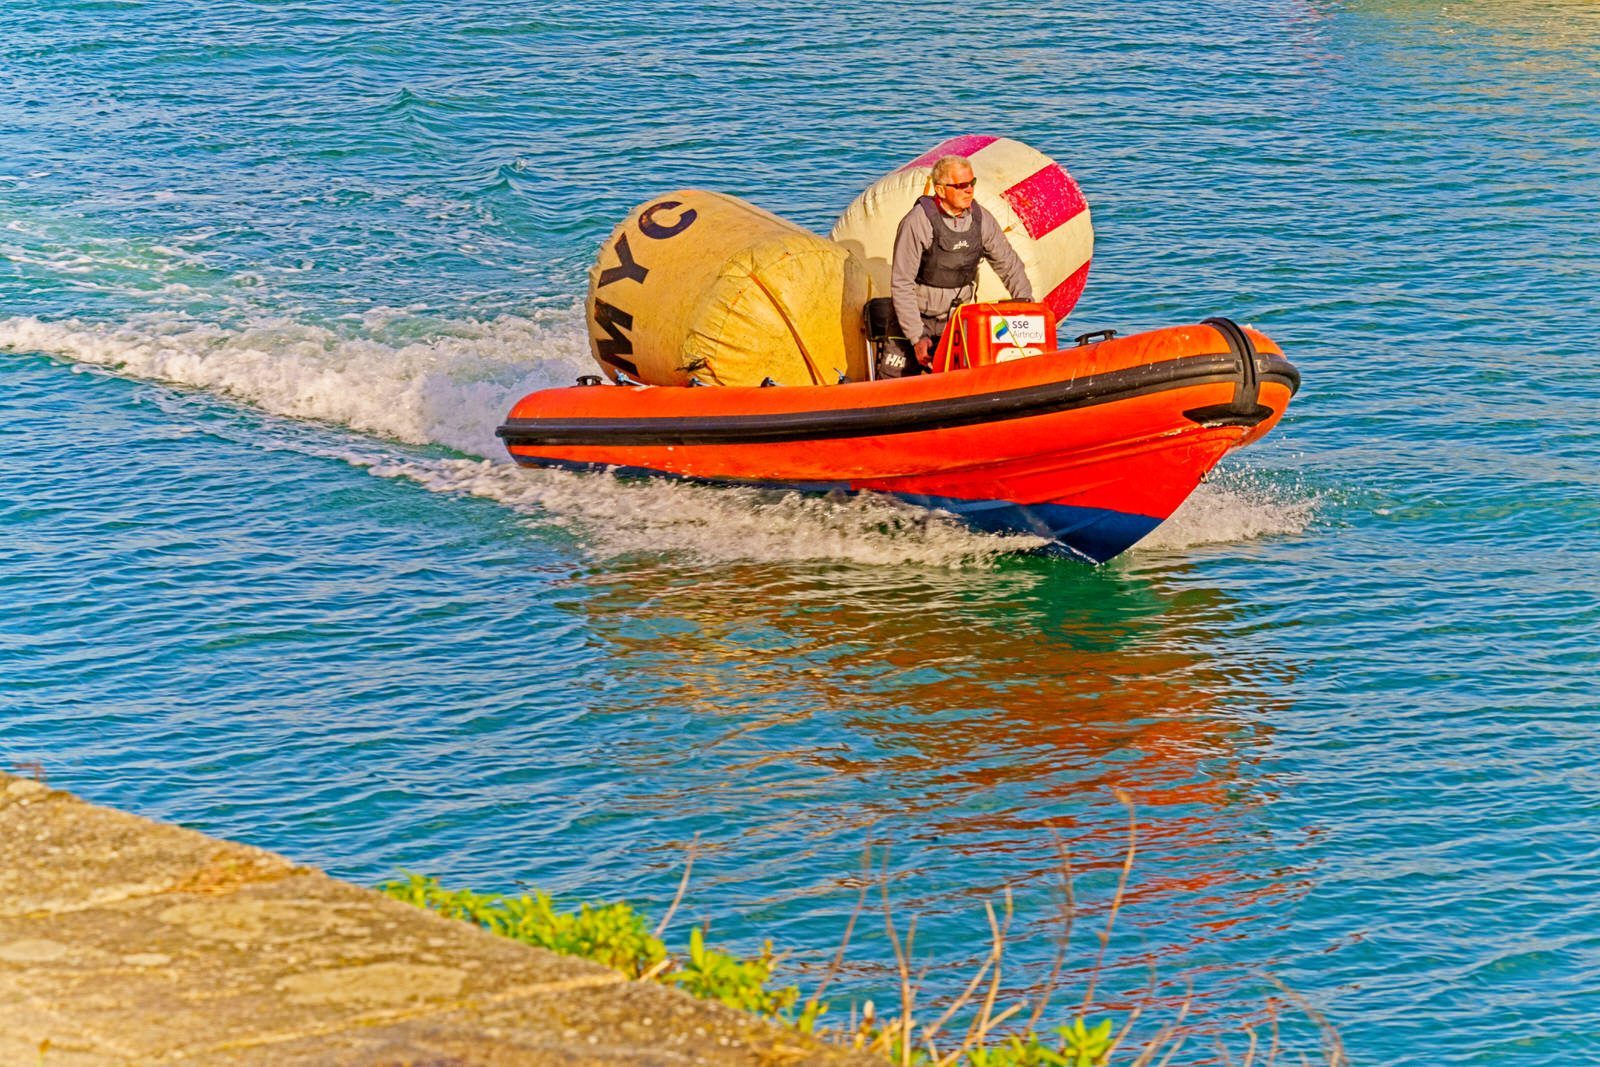 A MAN AND HIS TWO BUOYS IN A RIB [DUN LAOGHAIRE HARBOUR WEST PIER] 004